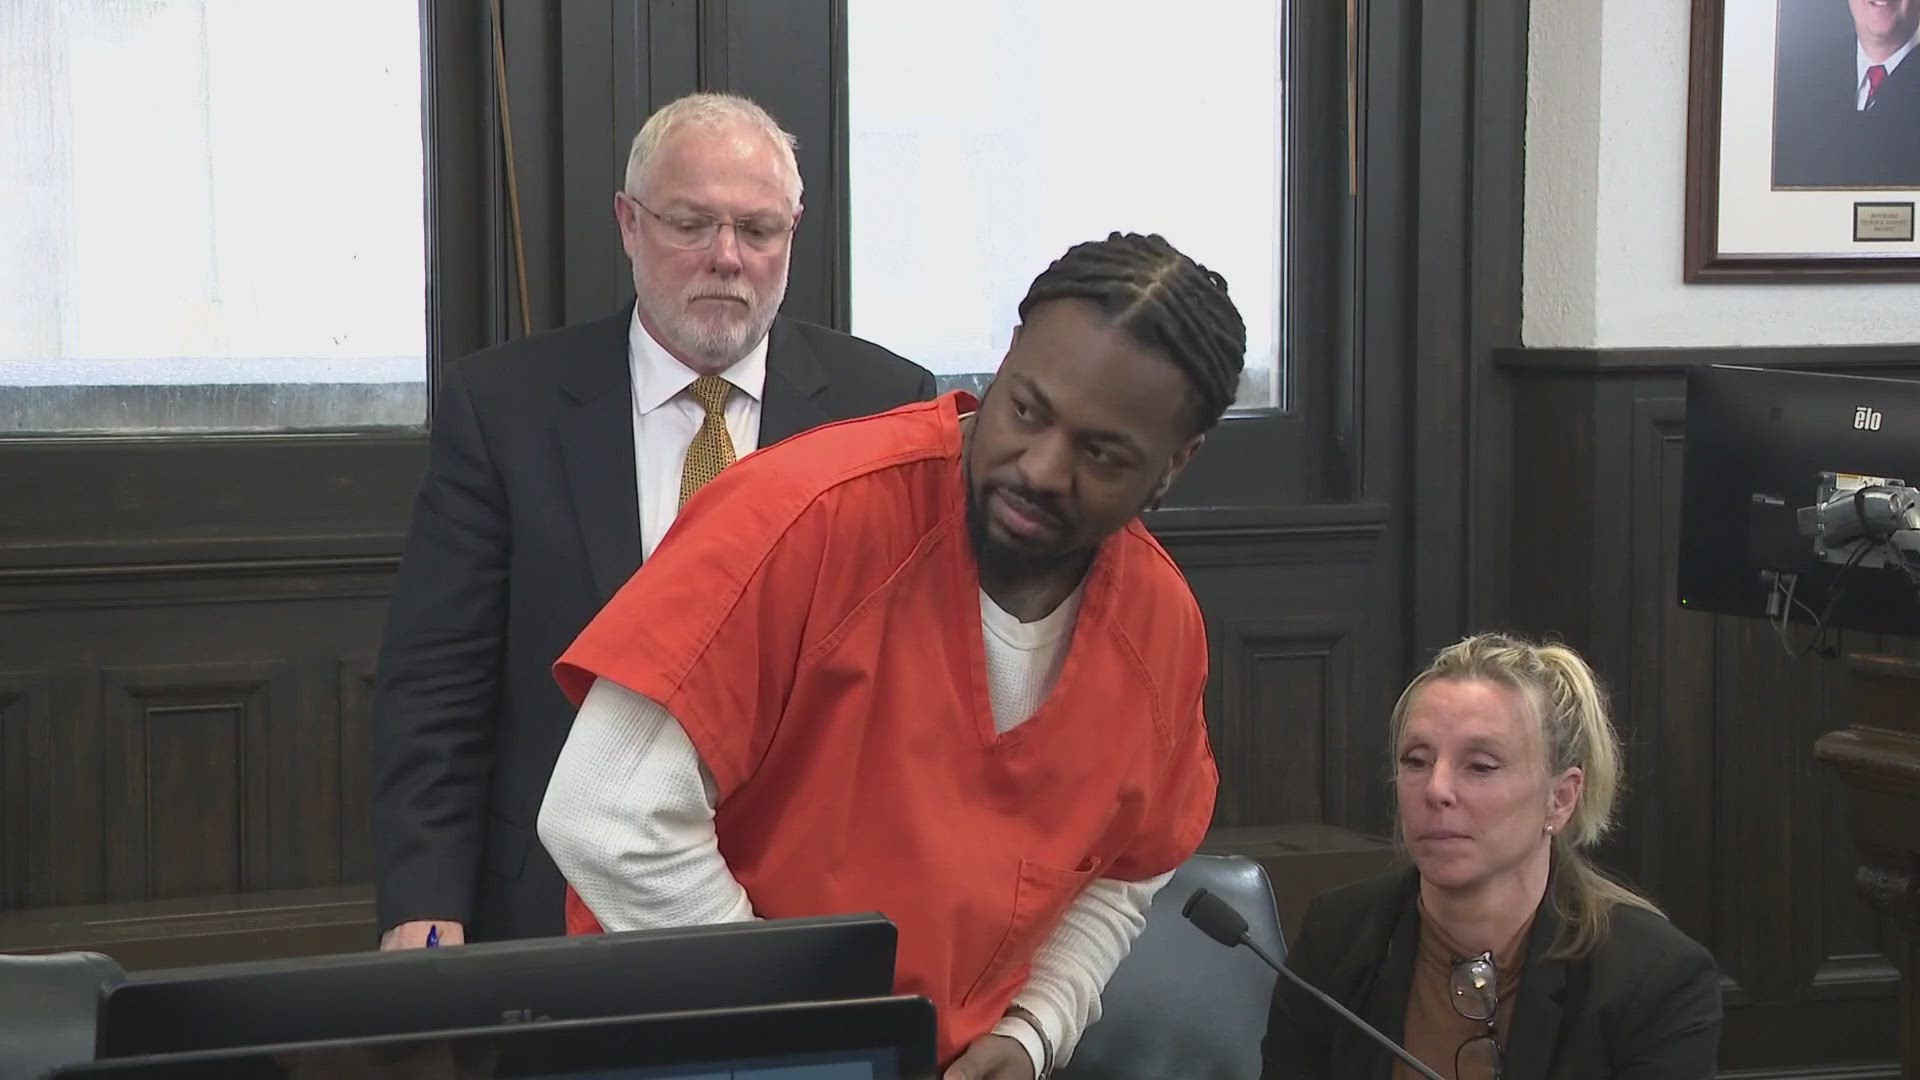 Dacarrei Kinard sentenced to prison for voluntary manslaughter in deadly shooting on I-76 in Norton